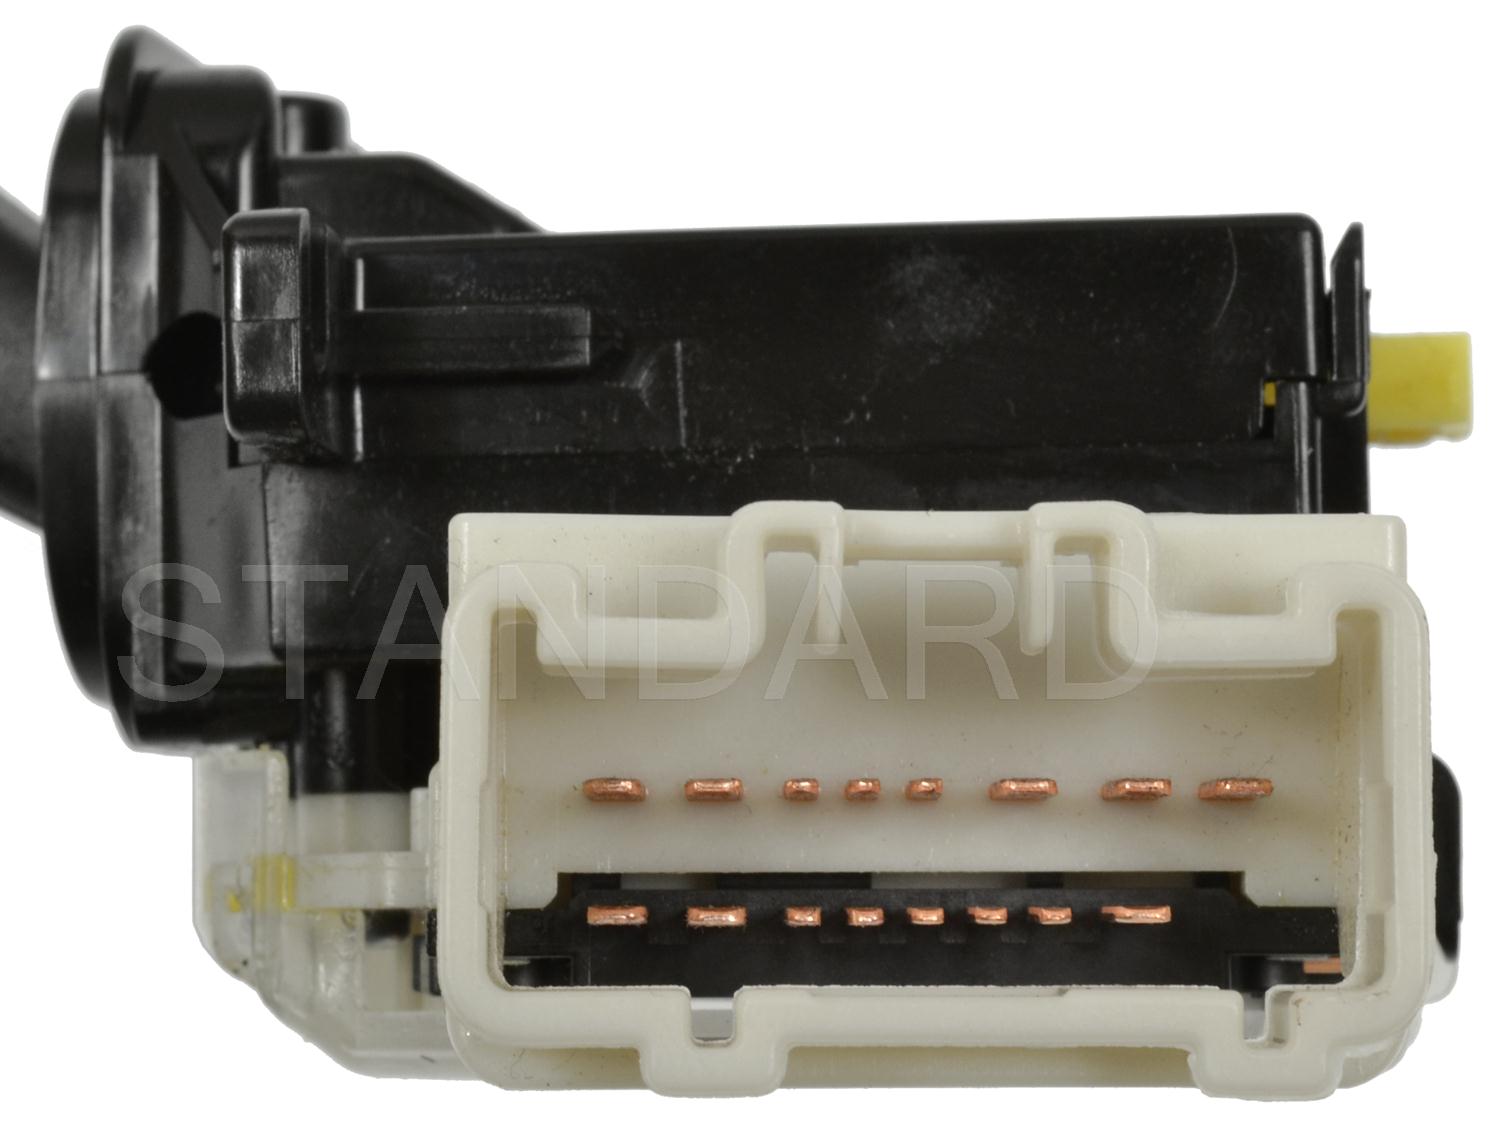 Picture of Standard Motor Products Cbs-2034 Combination Switch